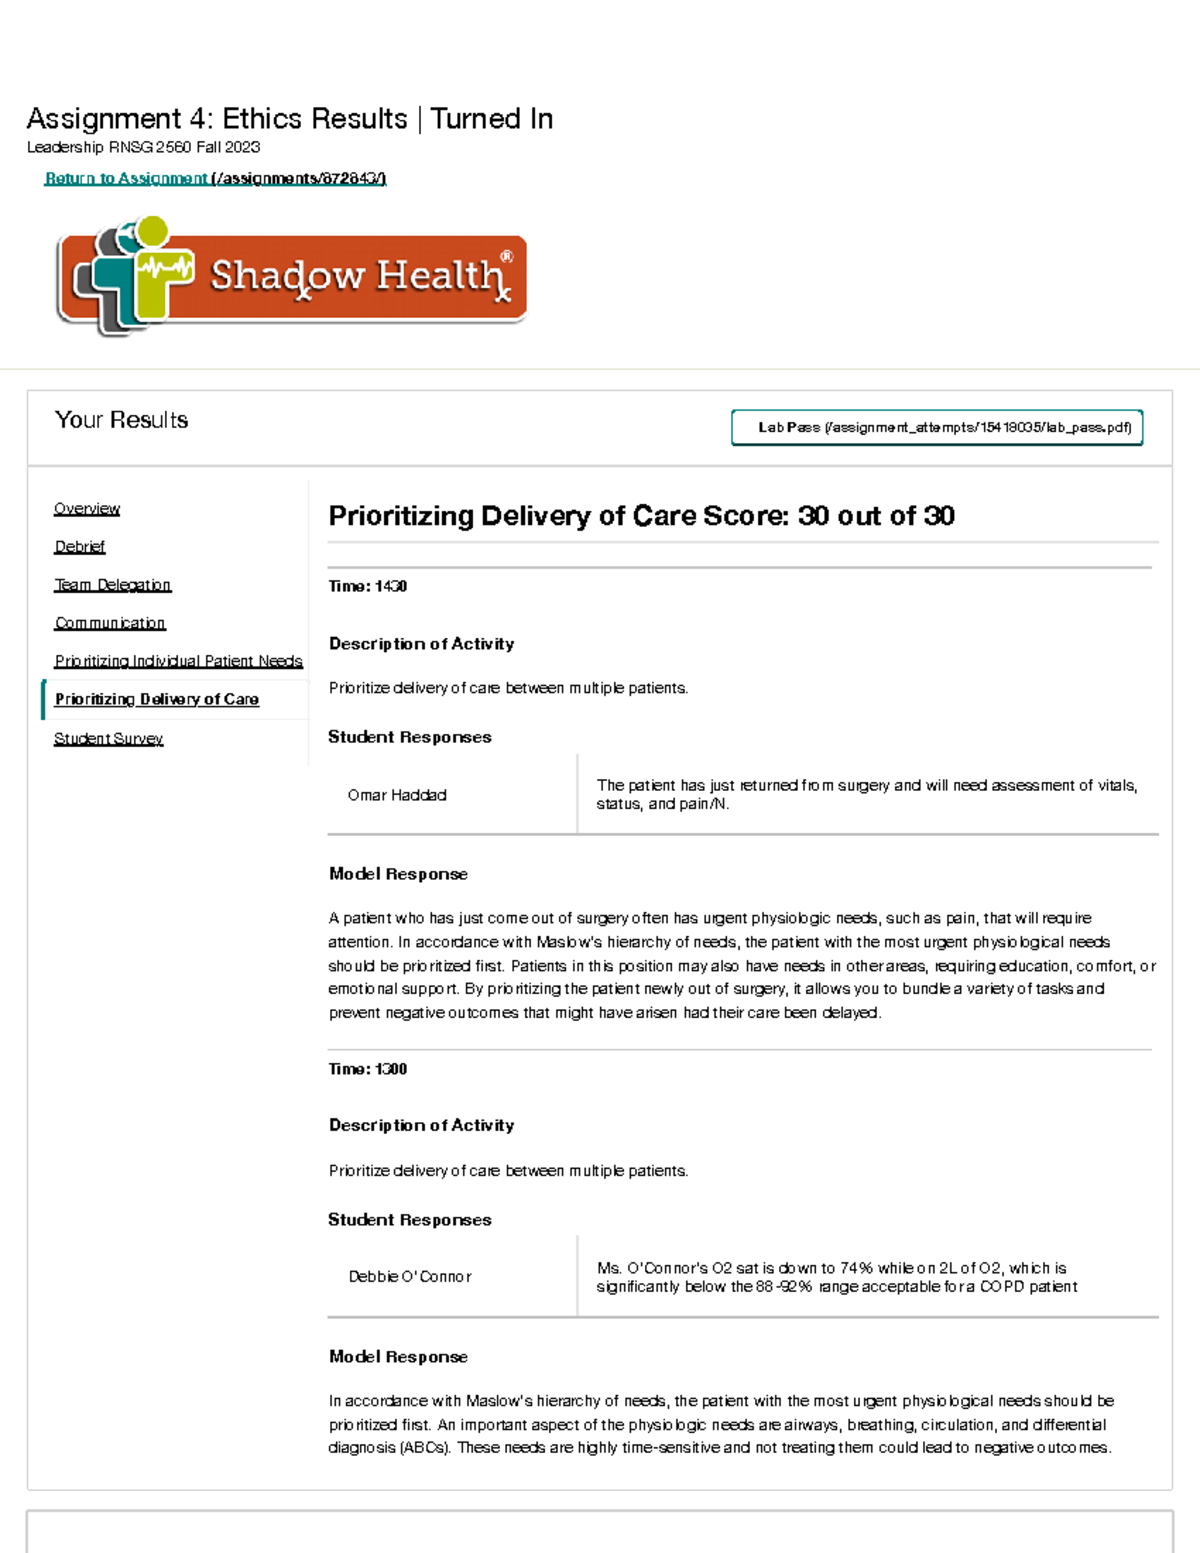 shadow health leadership assignment 4 ethics quizlet